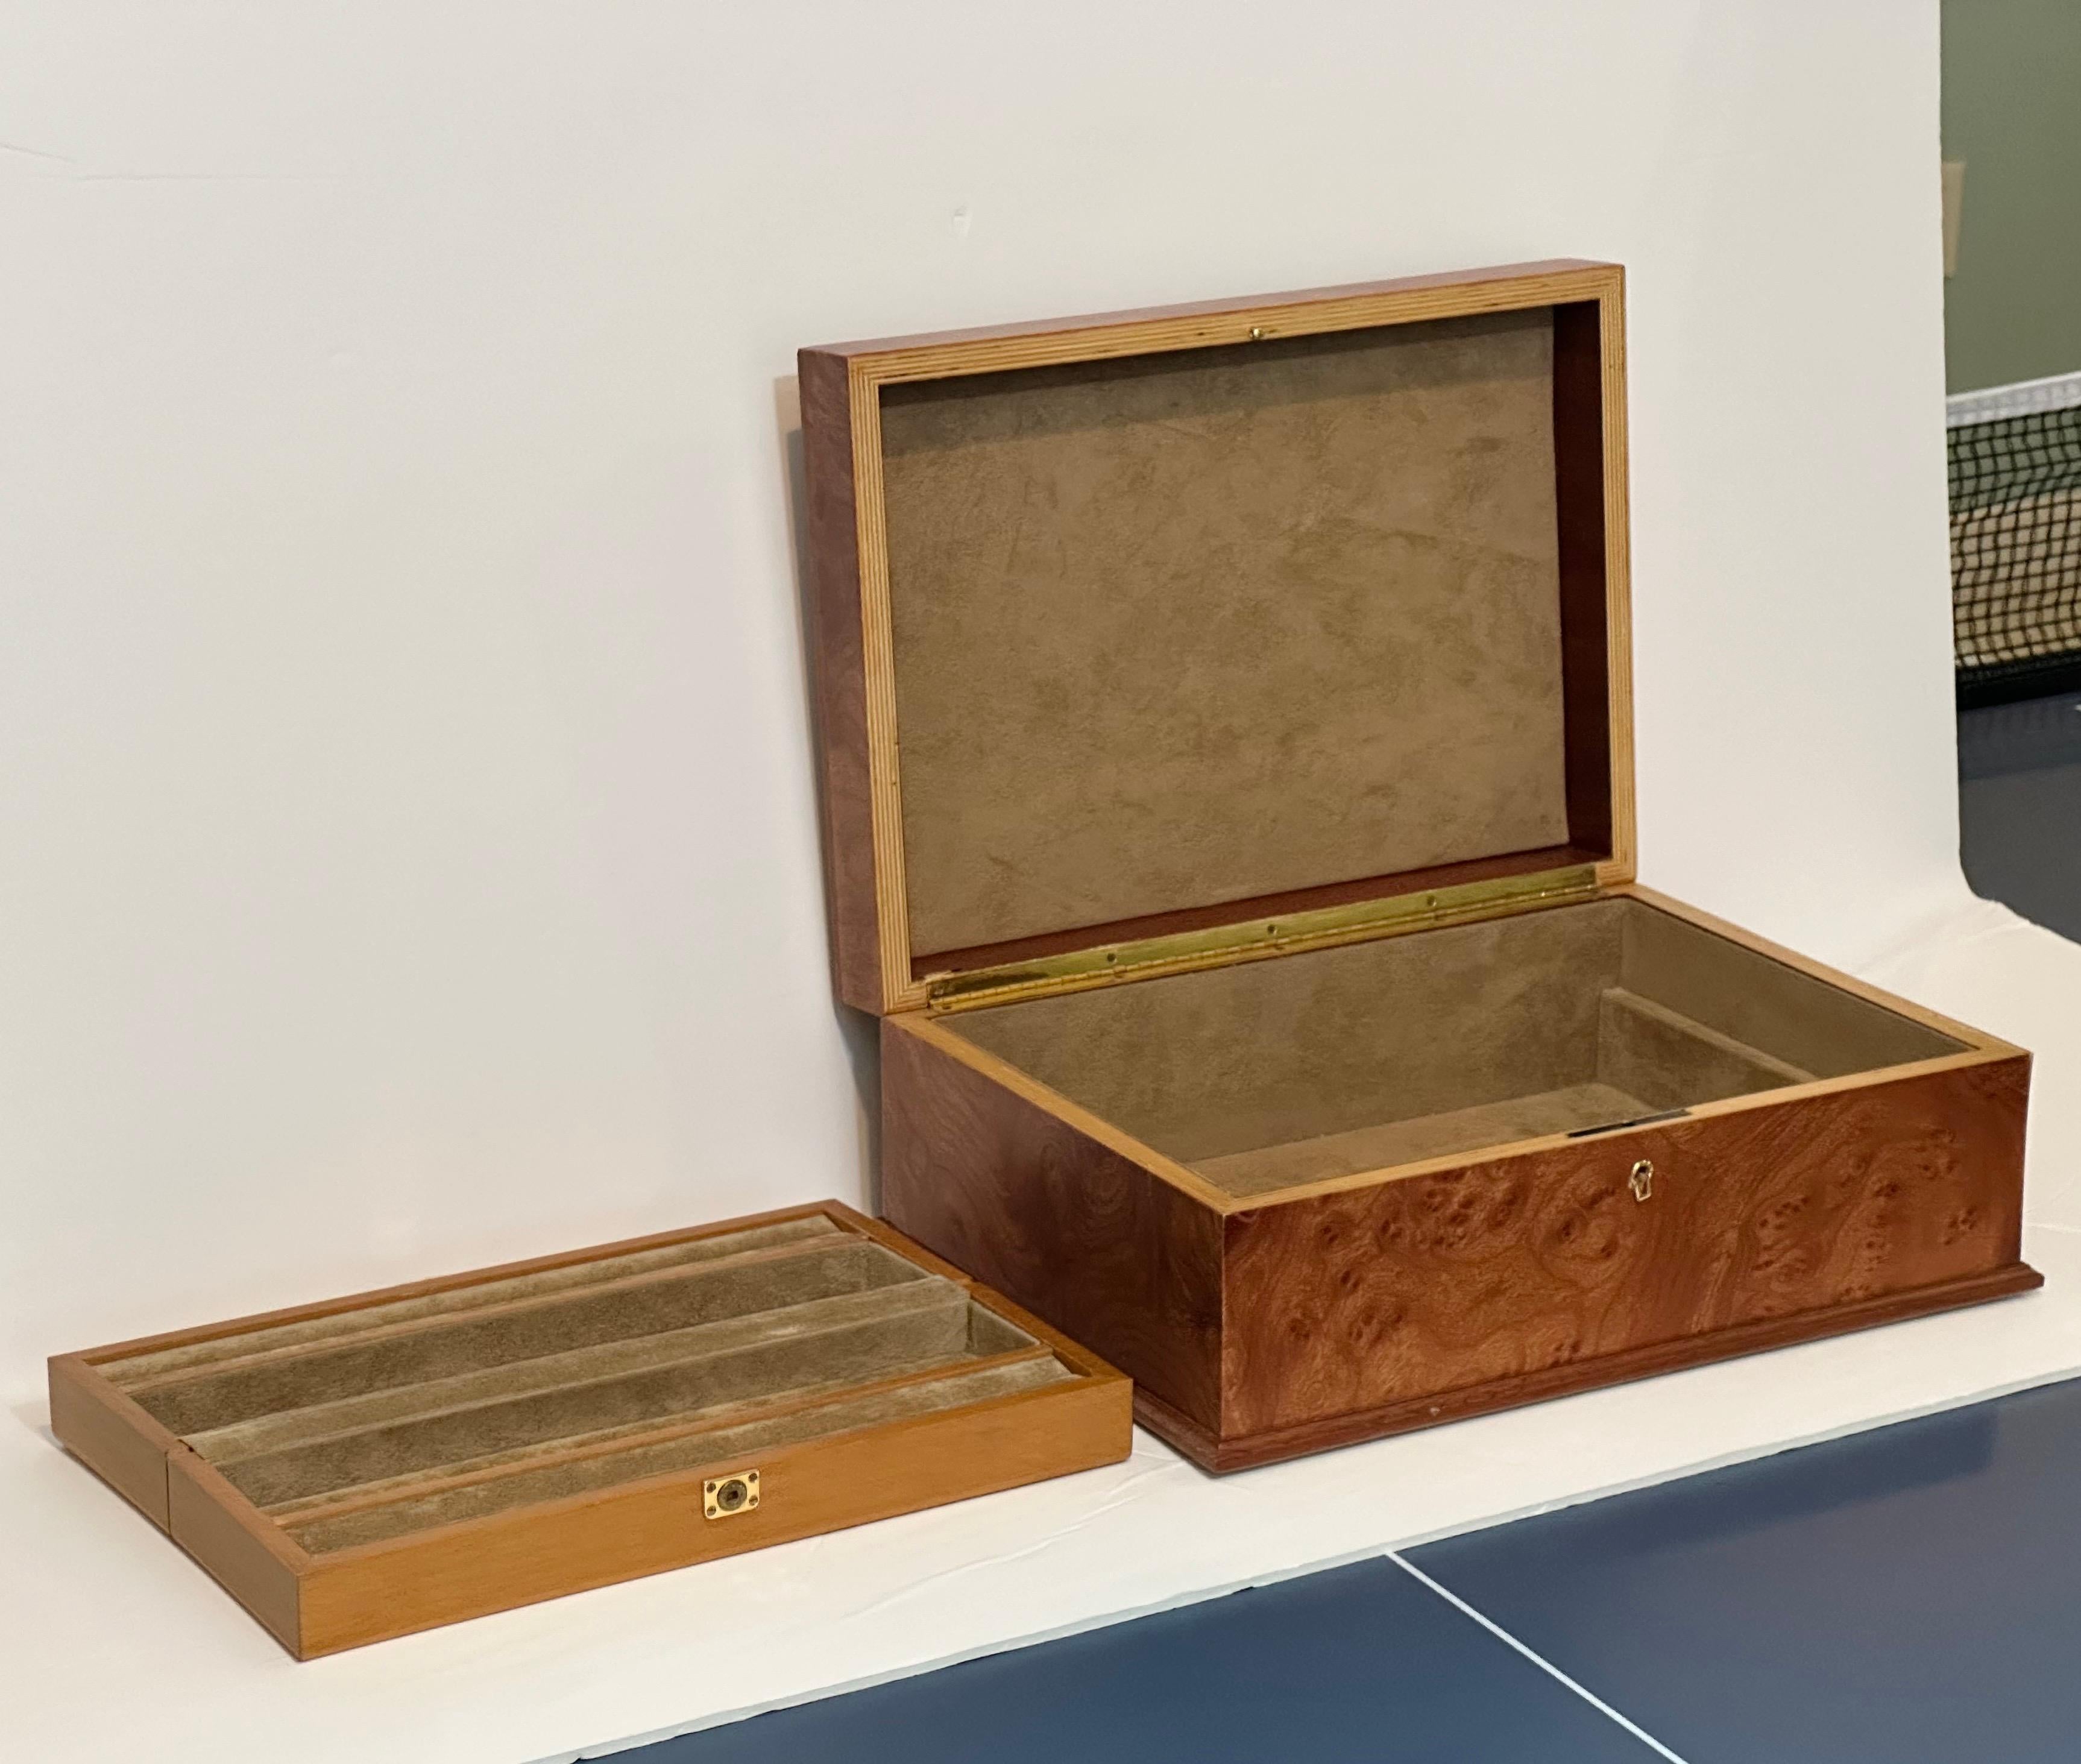 We are very pleased to offer a delightful burlwood jewelry box, circa the 1970s. Crafted with care, it serves as both a functional storage solution and a visually appealing piece.  As you lift the lid, you'll discover a well-designed interior that